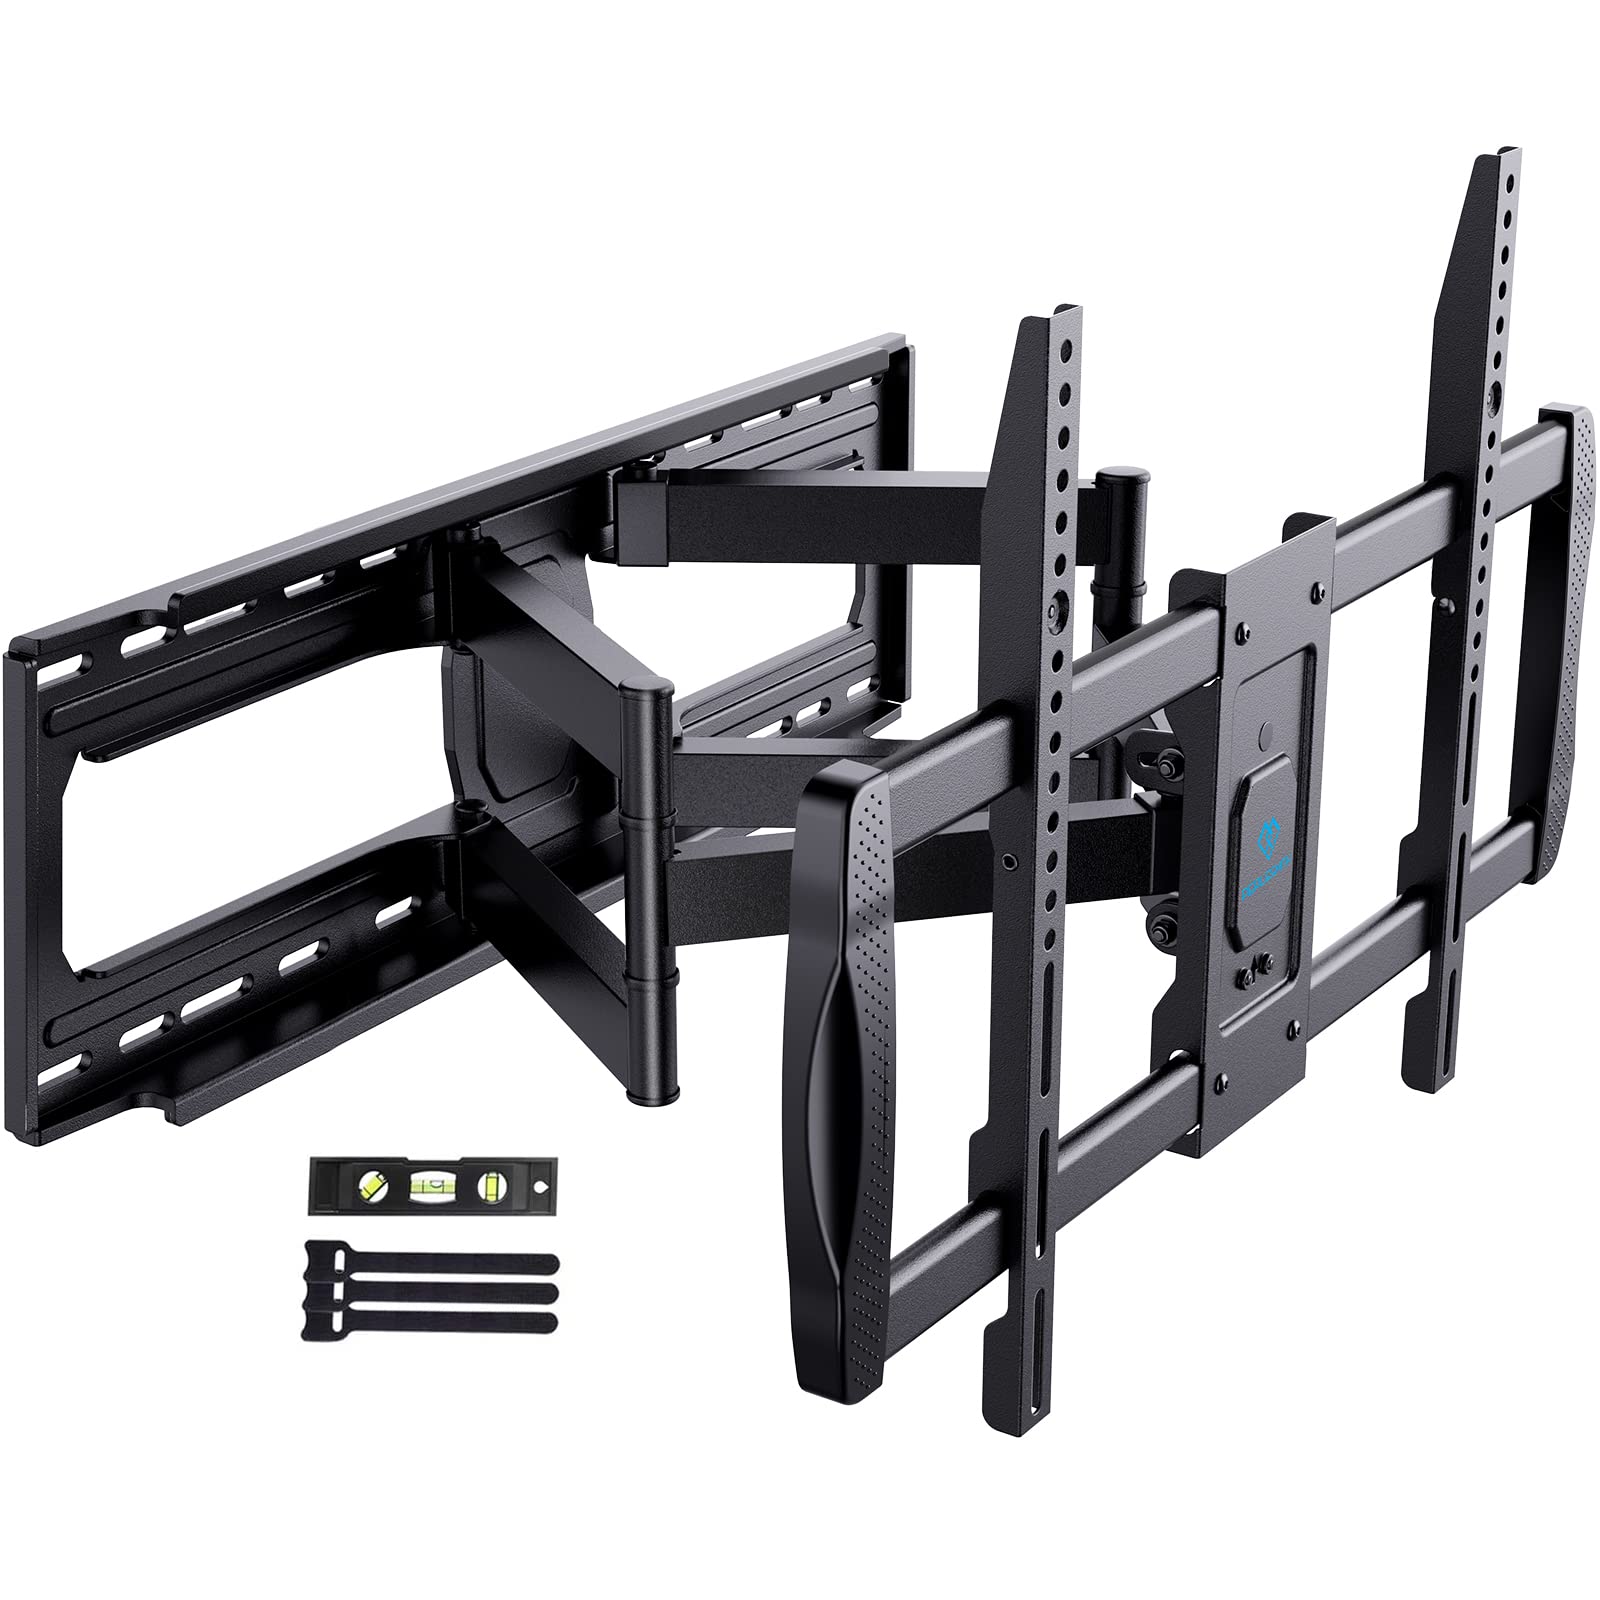 PERLESMITH Full Motion TV Wall Mount for 50”-90” TVs, TV Mount Bracket Dual Articulating Arms Swivel Extension tilt up to 165lbs, Max VESA 800x400mm, Fits 16”18” to 24" Studs, PSXFK1